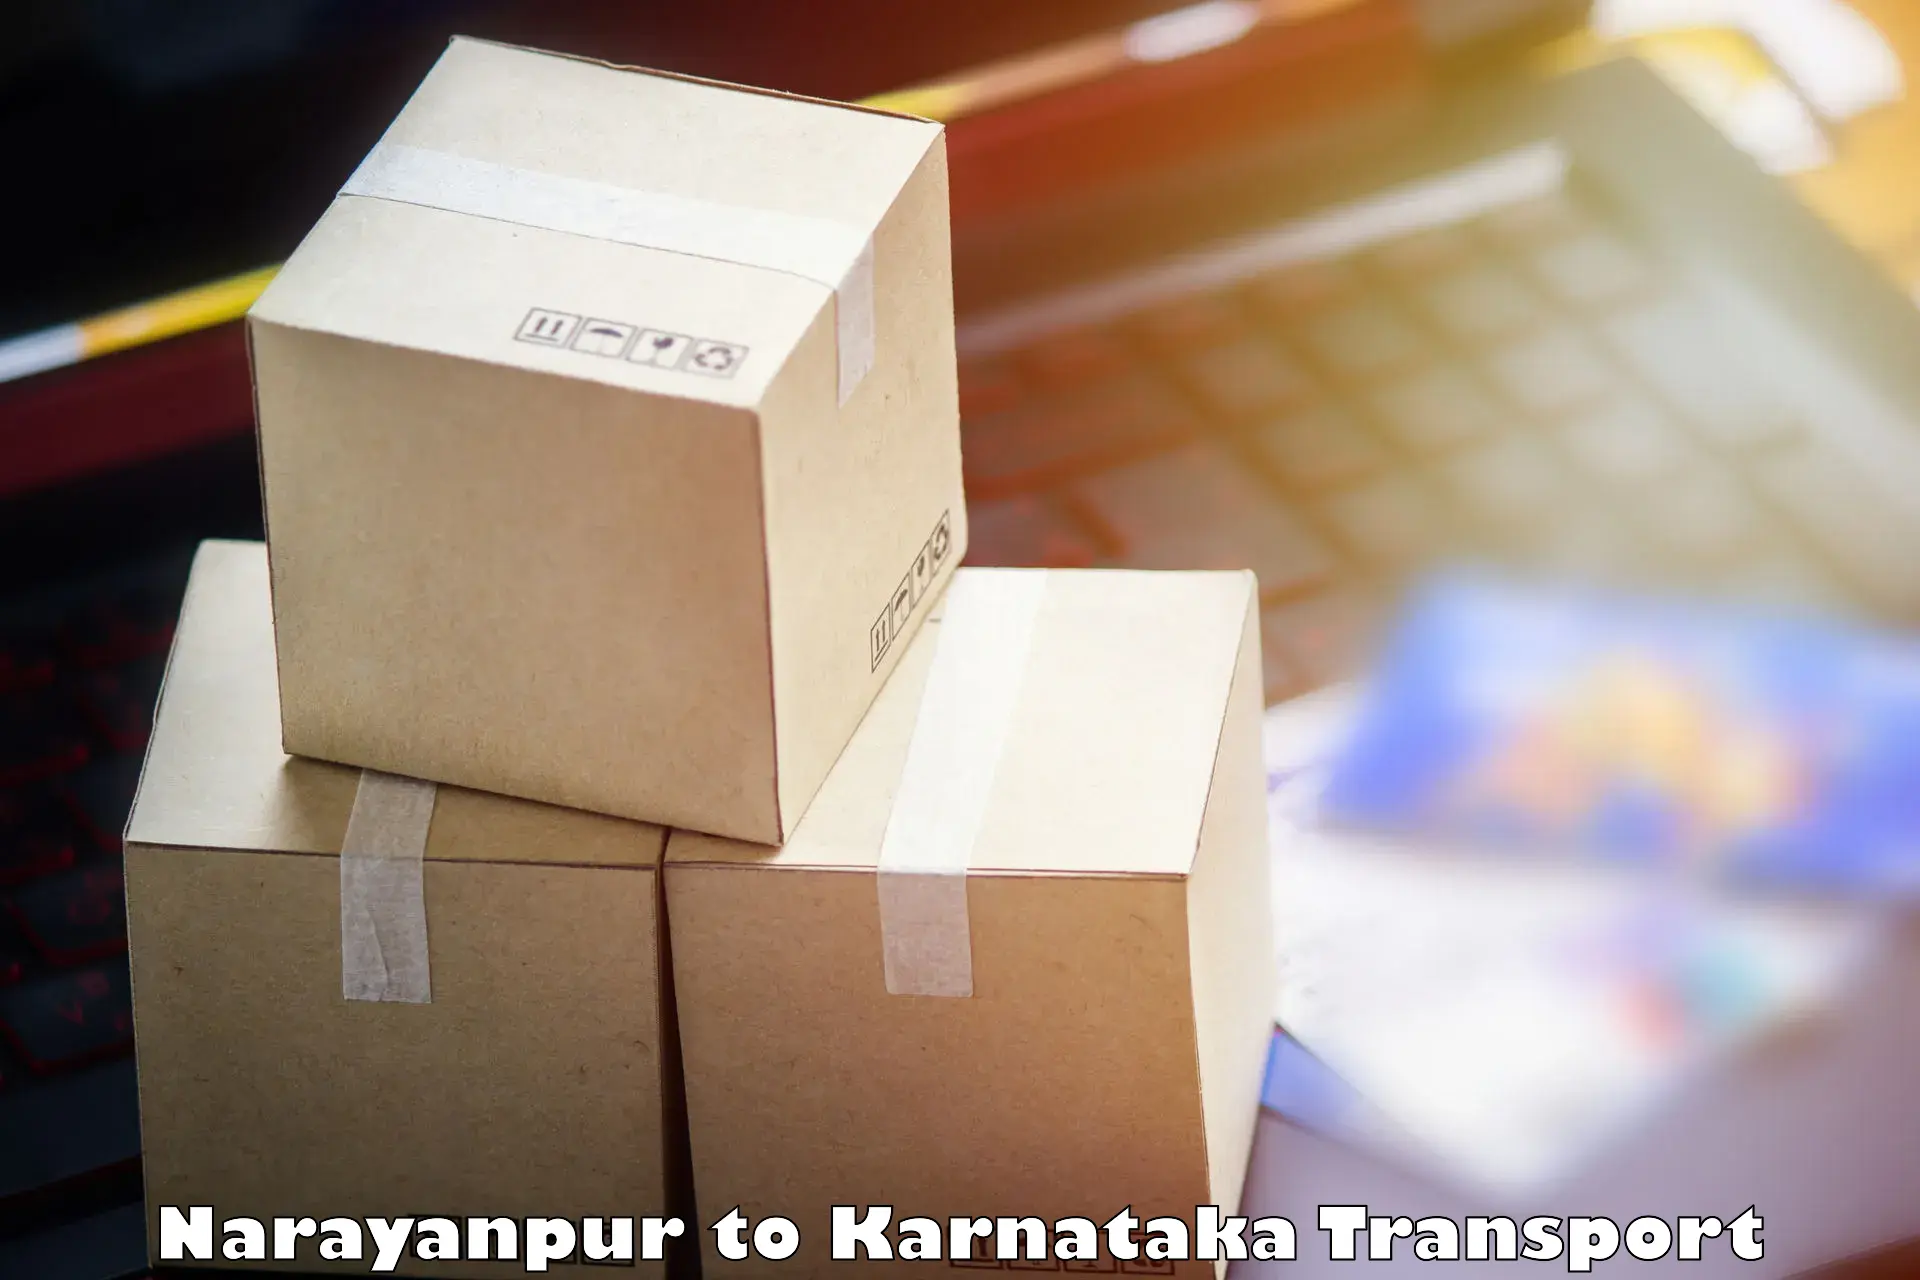 Commercial transport service Narayanpur to Shanivarasanthe